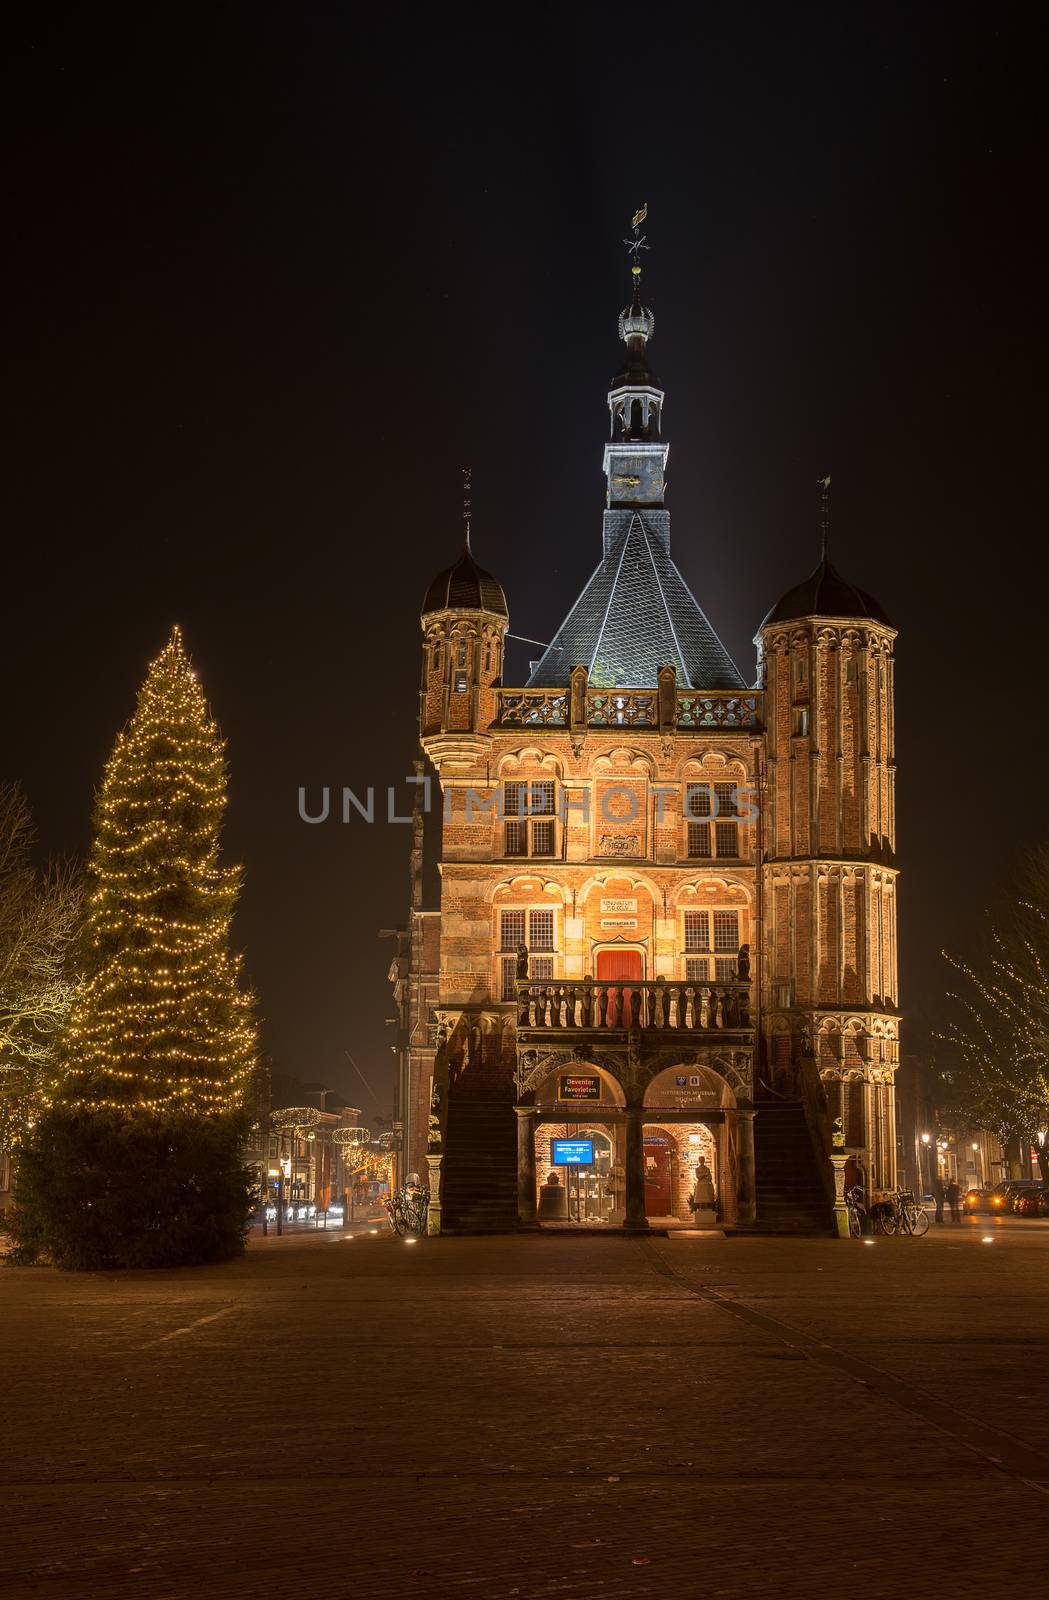 Illuminated market place in the Netherlands by Tofotografie